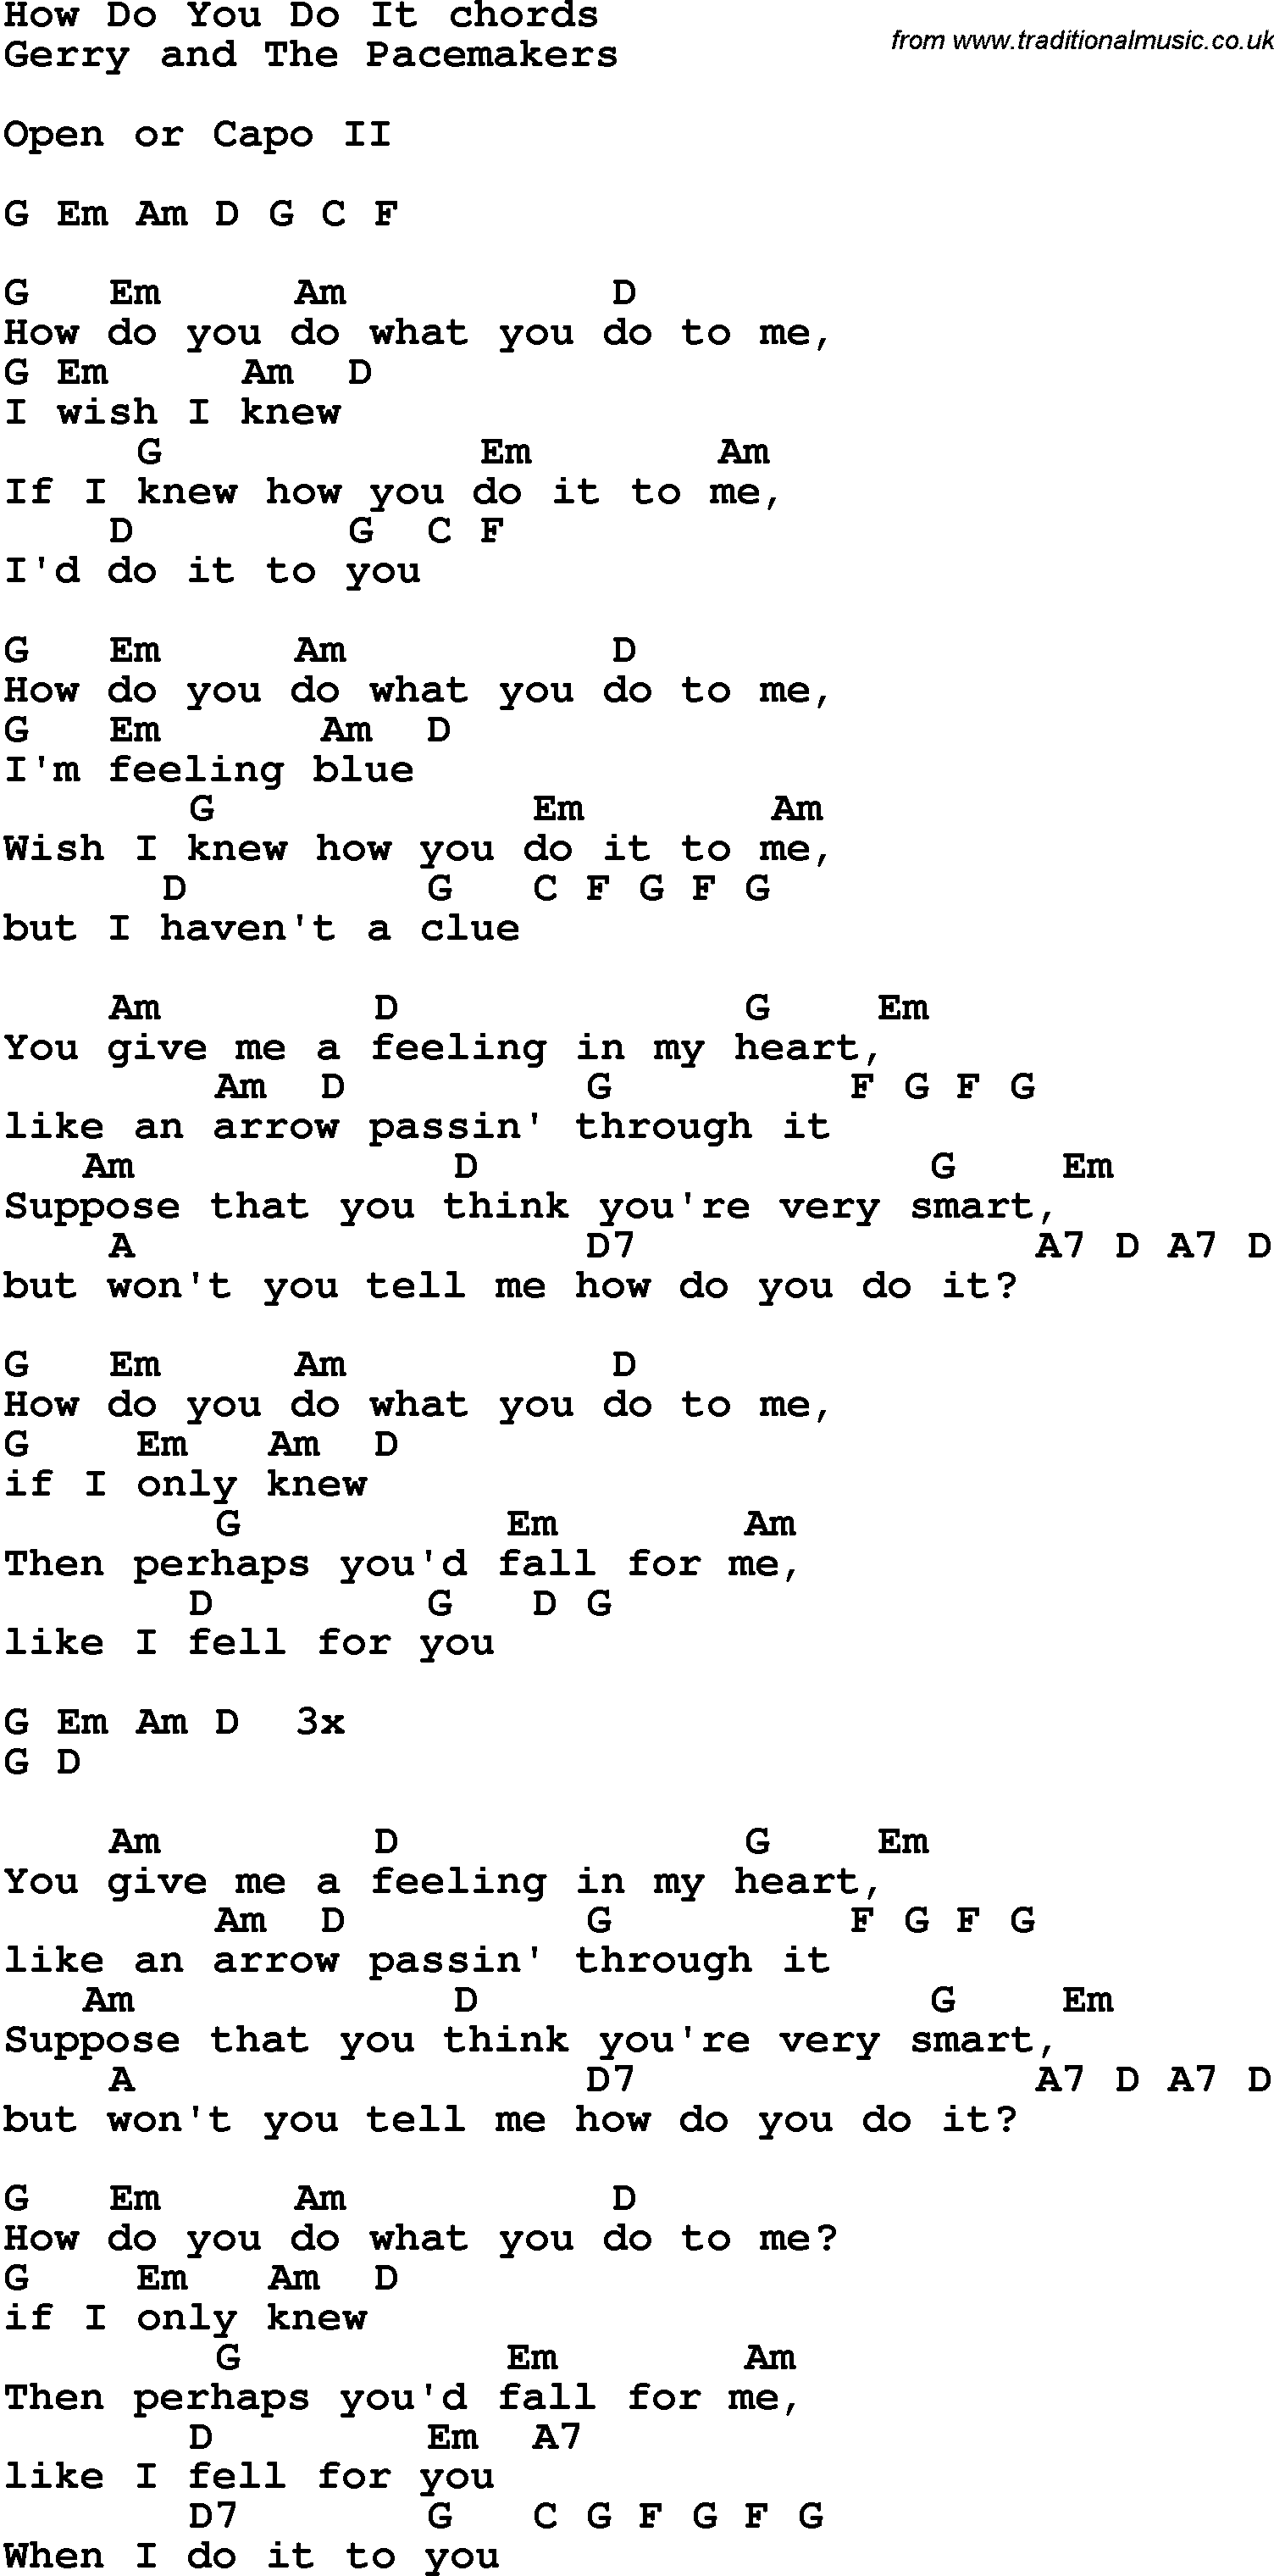 Song Lyrics with guitar chords for How Do You Do It